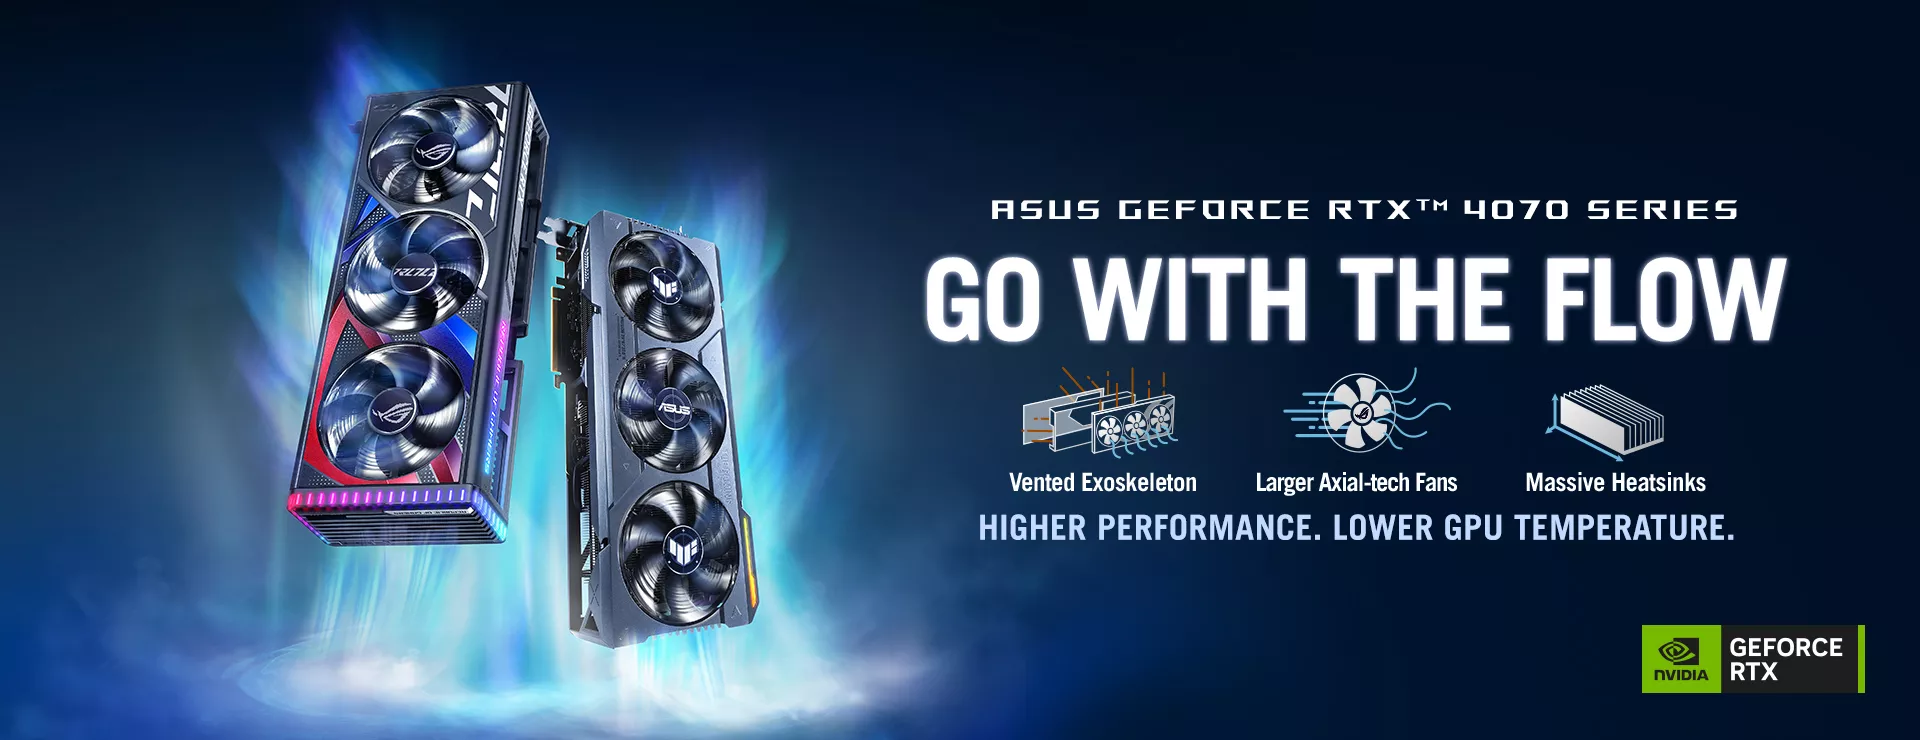 The ROG Strix GeForce RTX 4070 graphics card and ASUS TUF Gaming GeForce RTX 4070 graphics card hero banner graphics